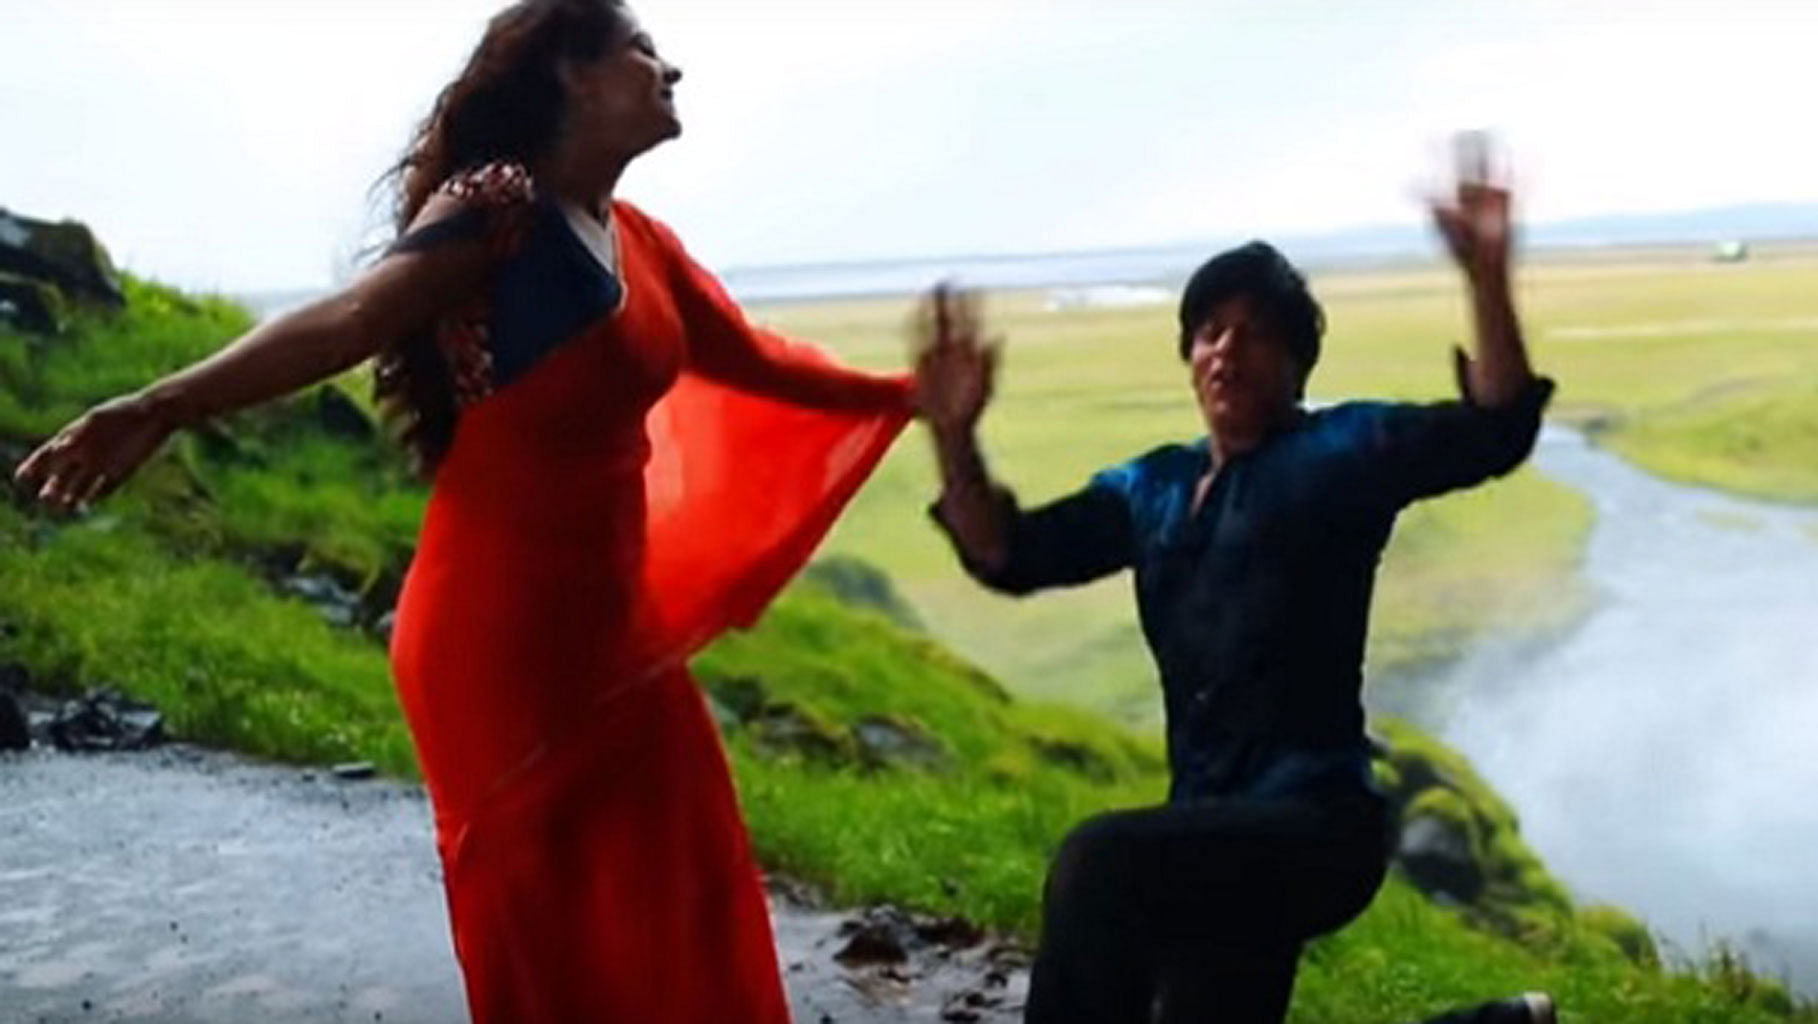 Gerua song by khalid mushtaq. A copy version from dilwale movie - YouTube